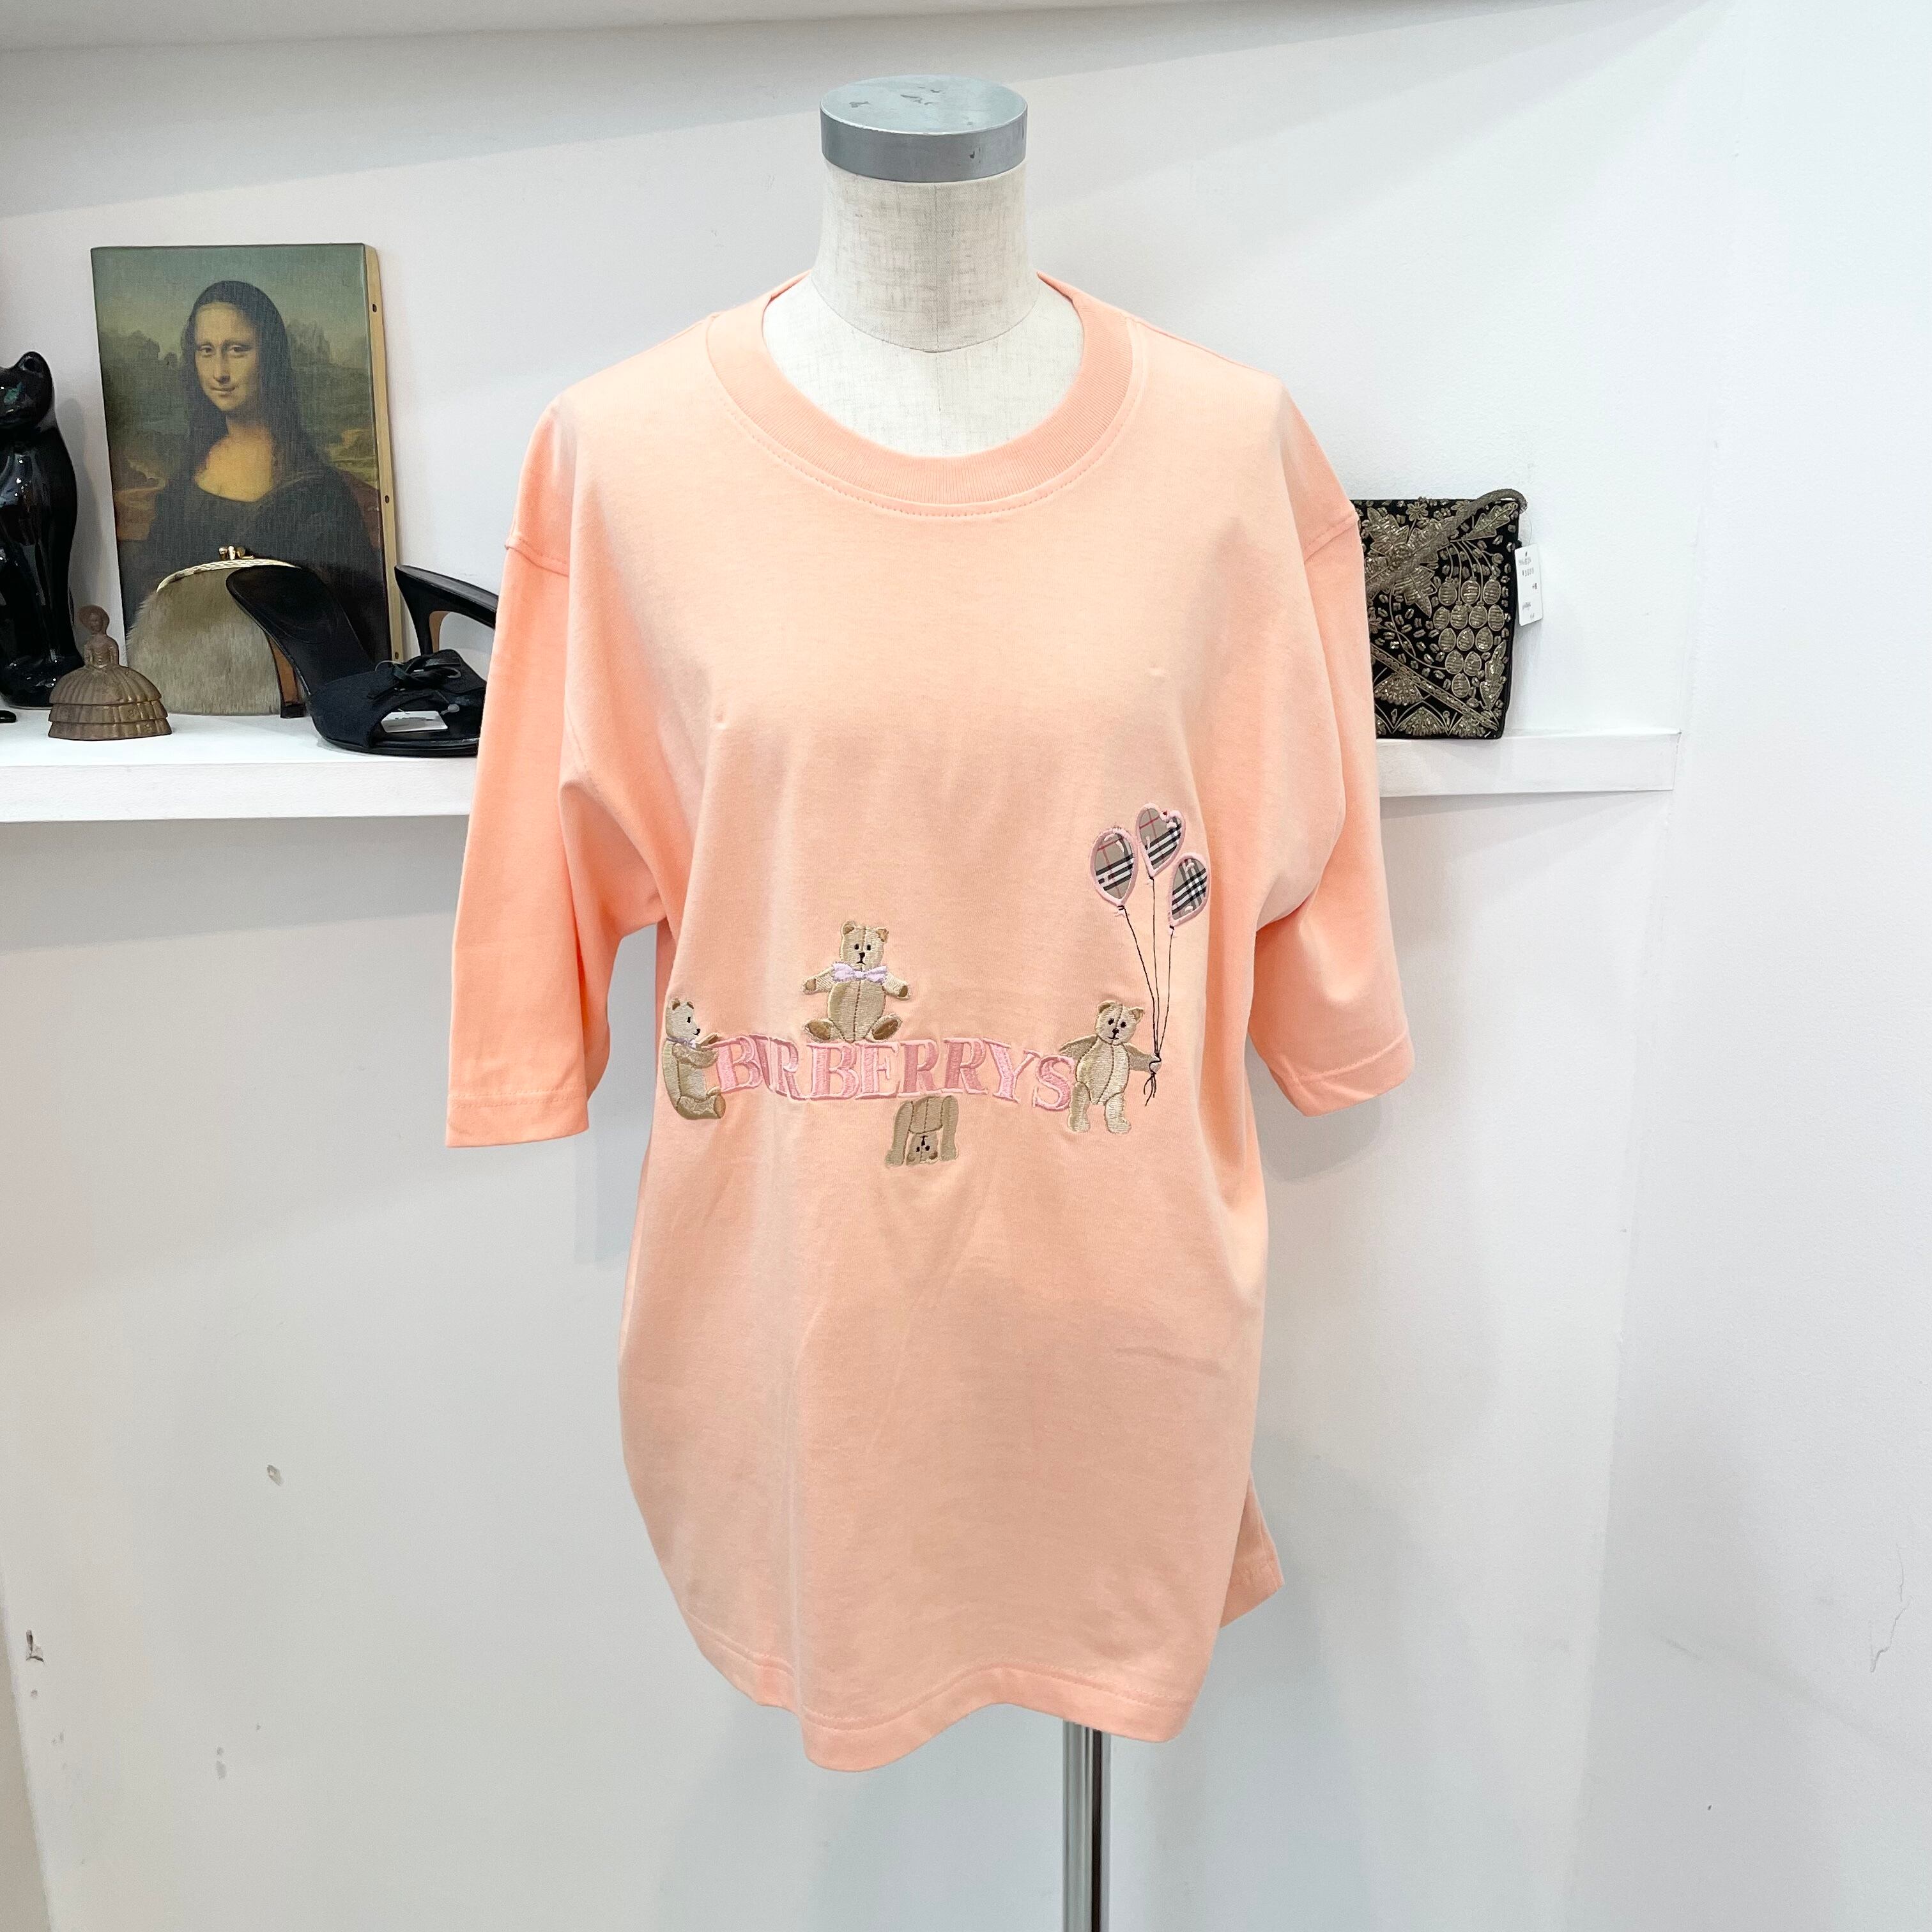 Burberry/tops/bear/Ssize/salmon pink/pink/バーバリー/トップス/半袖 ...